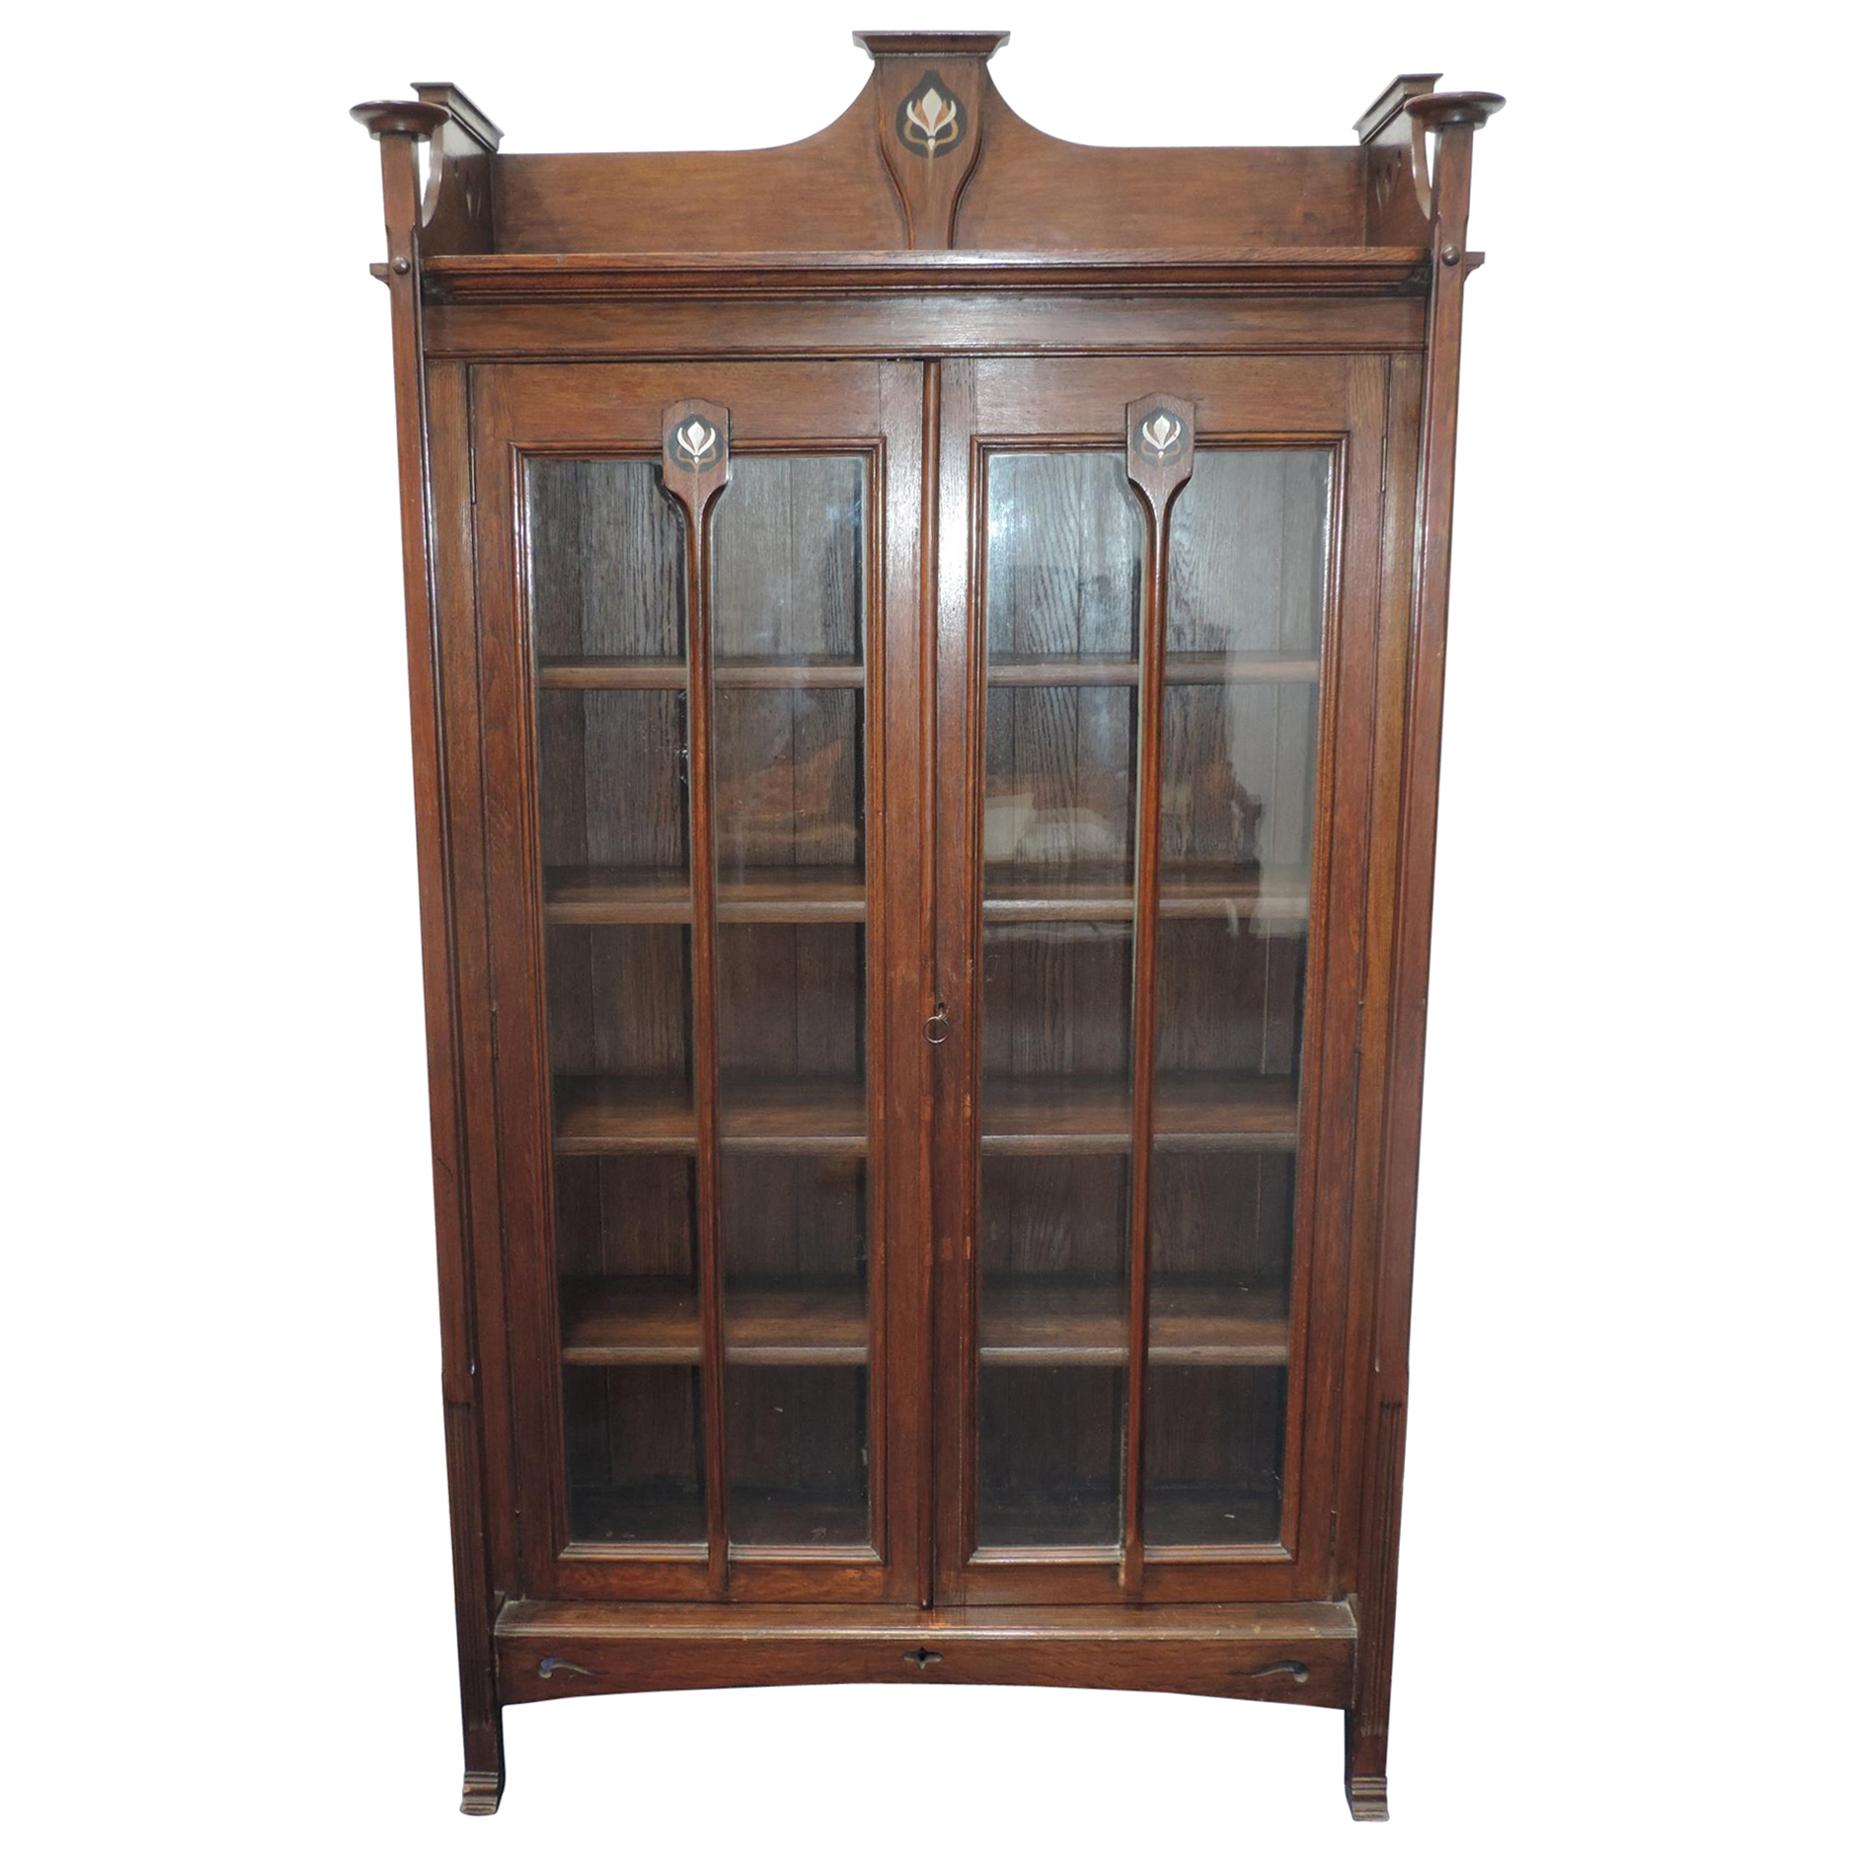 Wylie & Lochhead, Arts & Crafts Voysey Style Bookcase with Pewter & Ebony Inlays